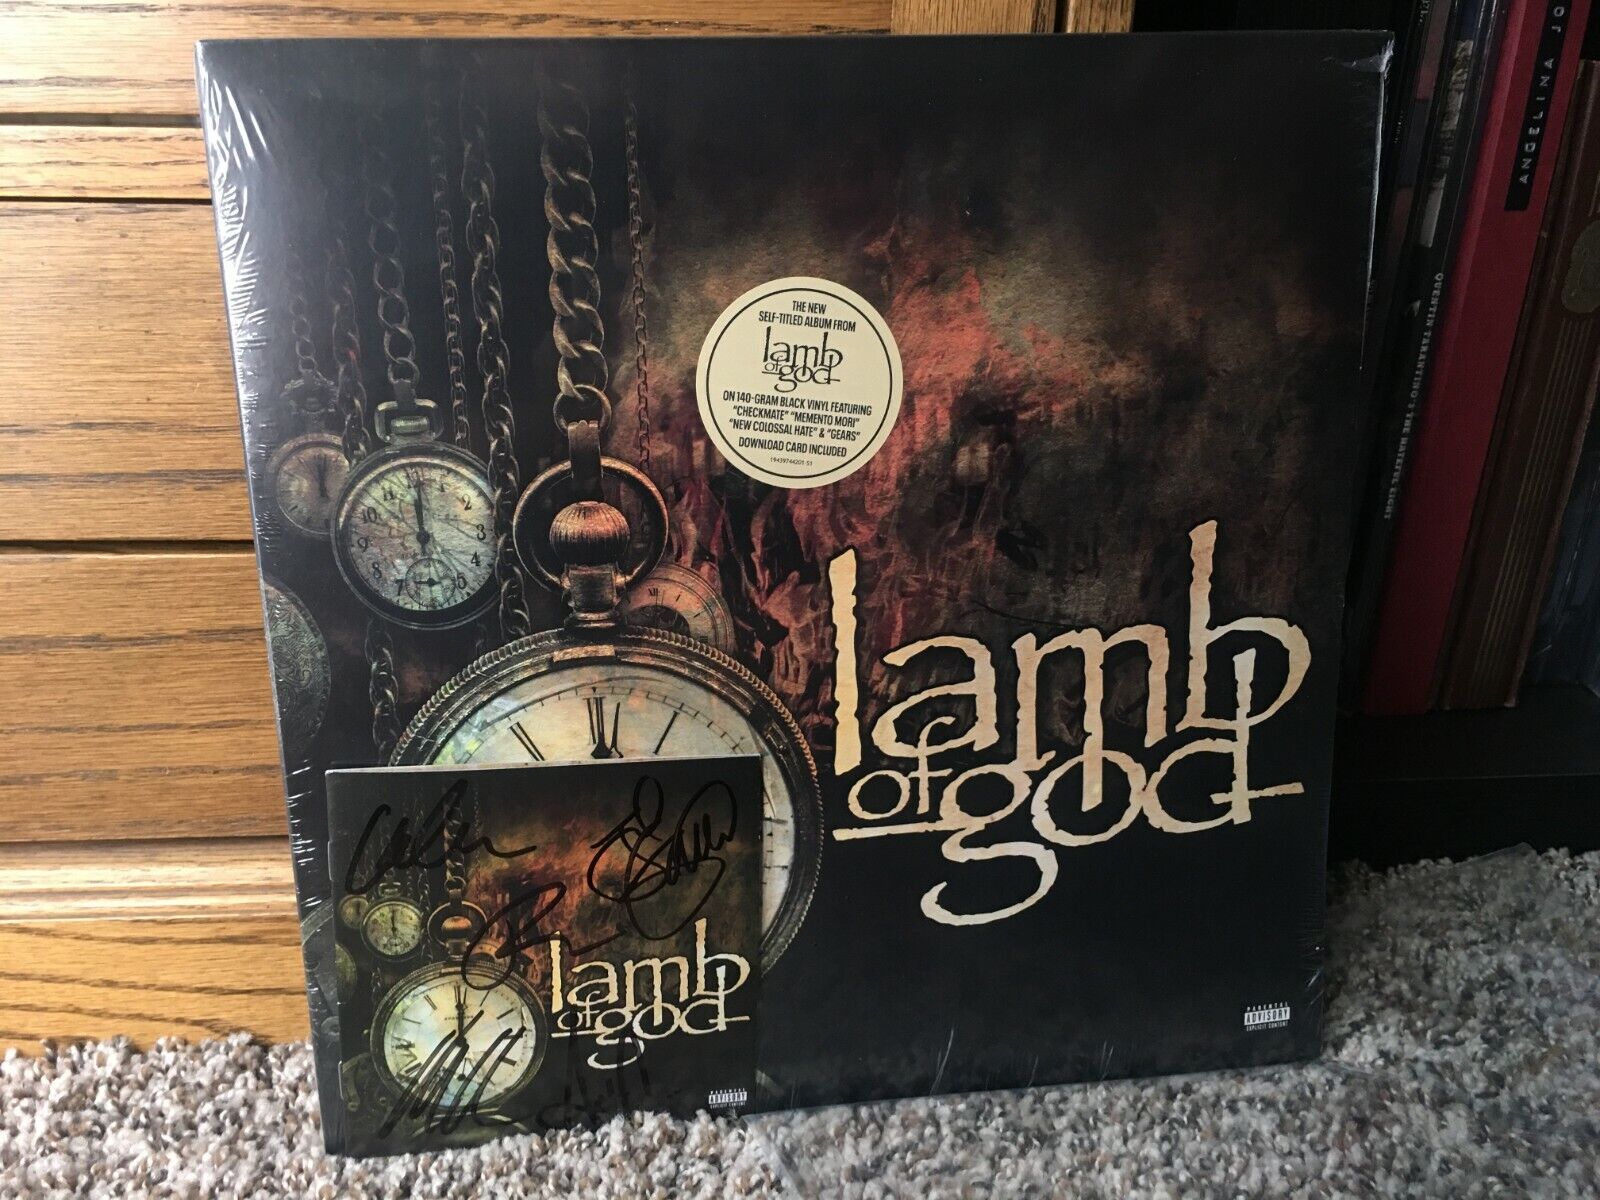  Lamb of God SIGNED Vinyl Brand New Sealed, Official Promo CD Booklet Included